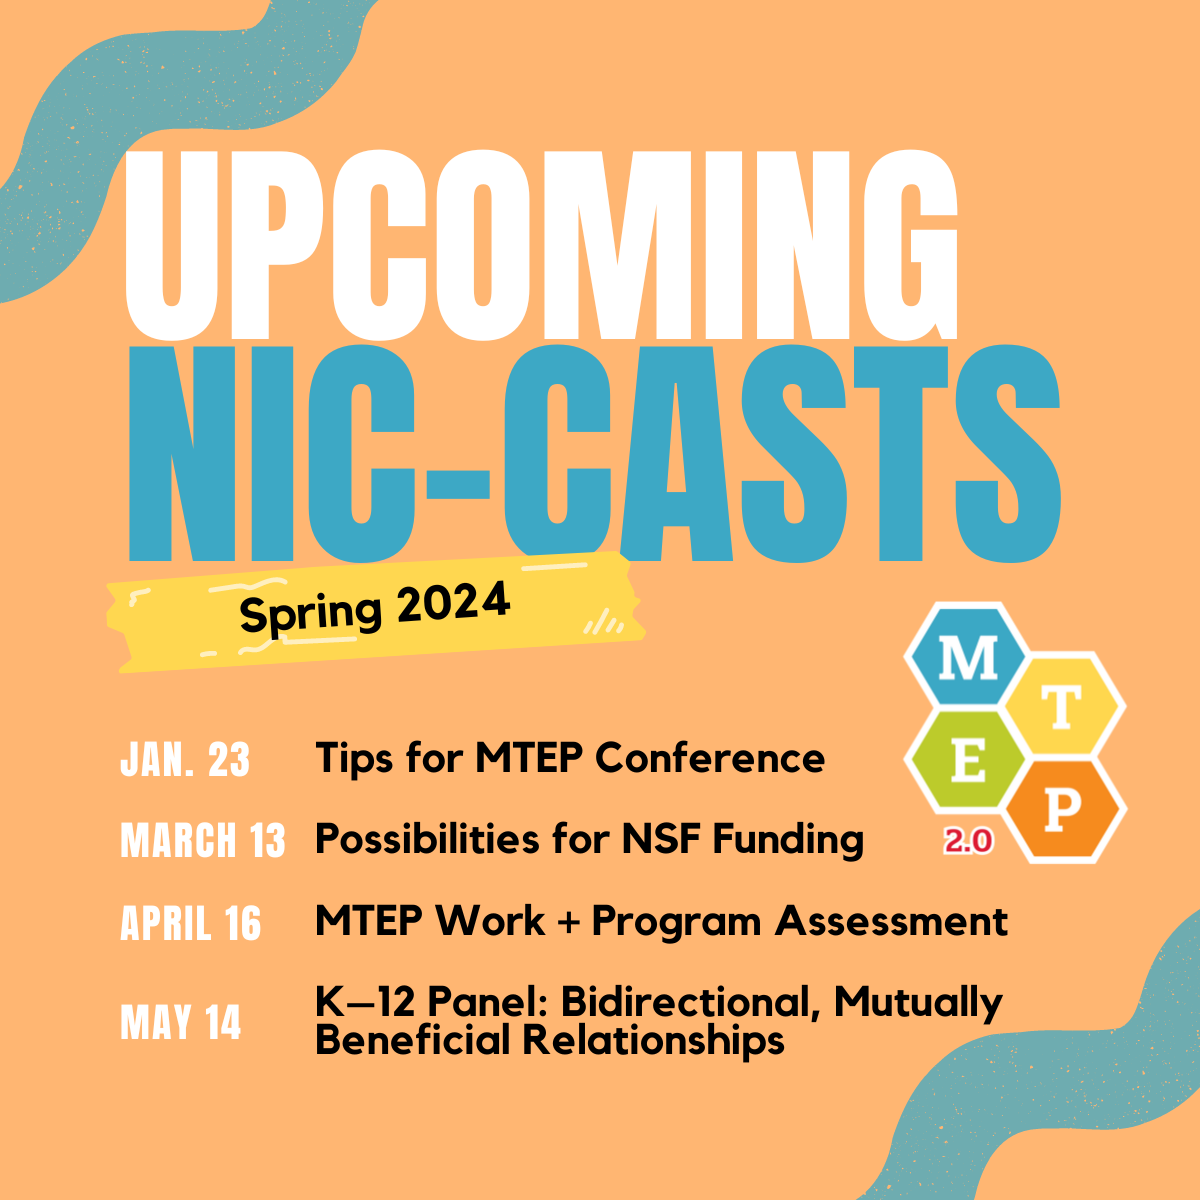 MTEP 2.0 will host NIC-Casts in Jan., March, April, and May 2024.